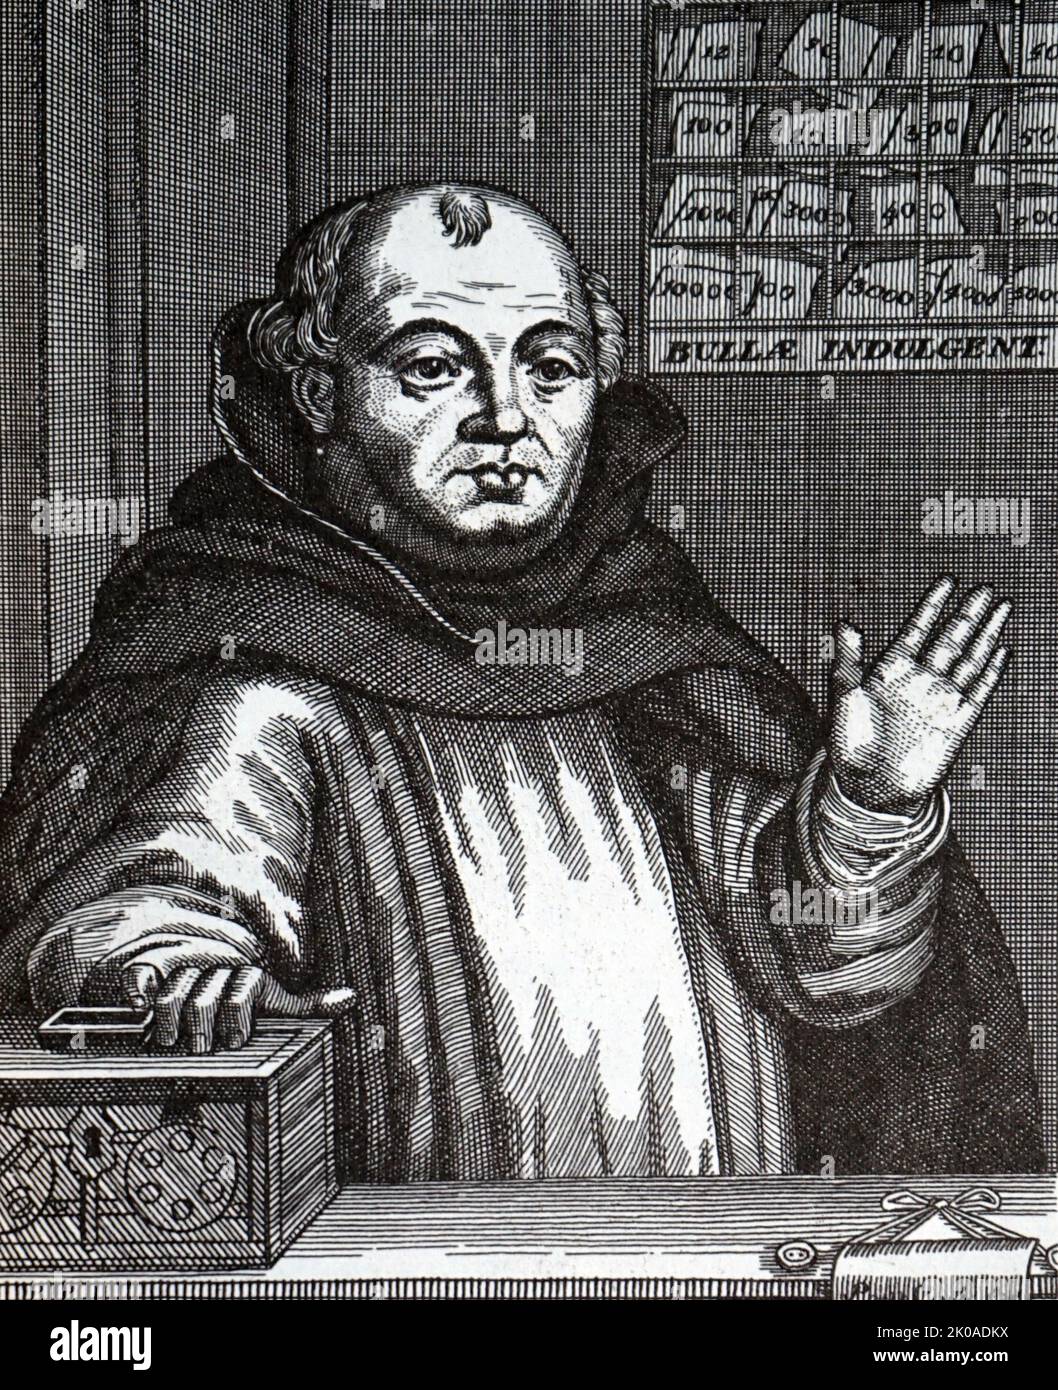 Johann Tetzel (c. 1465 - 1519) German Dominican friar and preacher. He was appointed Inquisitor for Poland and Saxony, later becoming the Grand Commissioner for indulgences in Germany. Tetzel was known for granting indulgences on behalf of the Catholic Church in exchange for money. The main usage of the indulgences sold by Johann Tetzel was to help fund and build the new St. Peter's Basilica in Rome Stock Photo